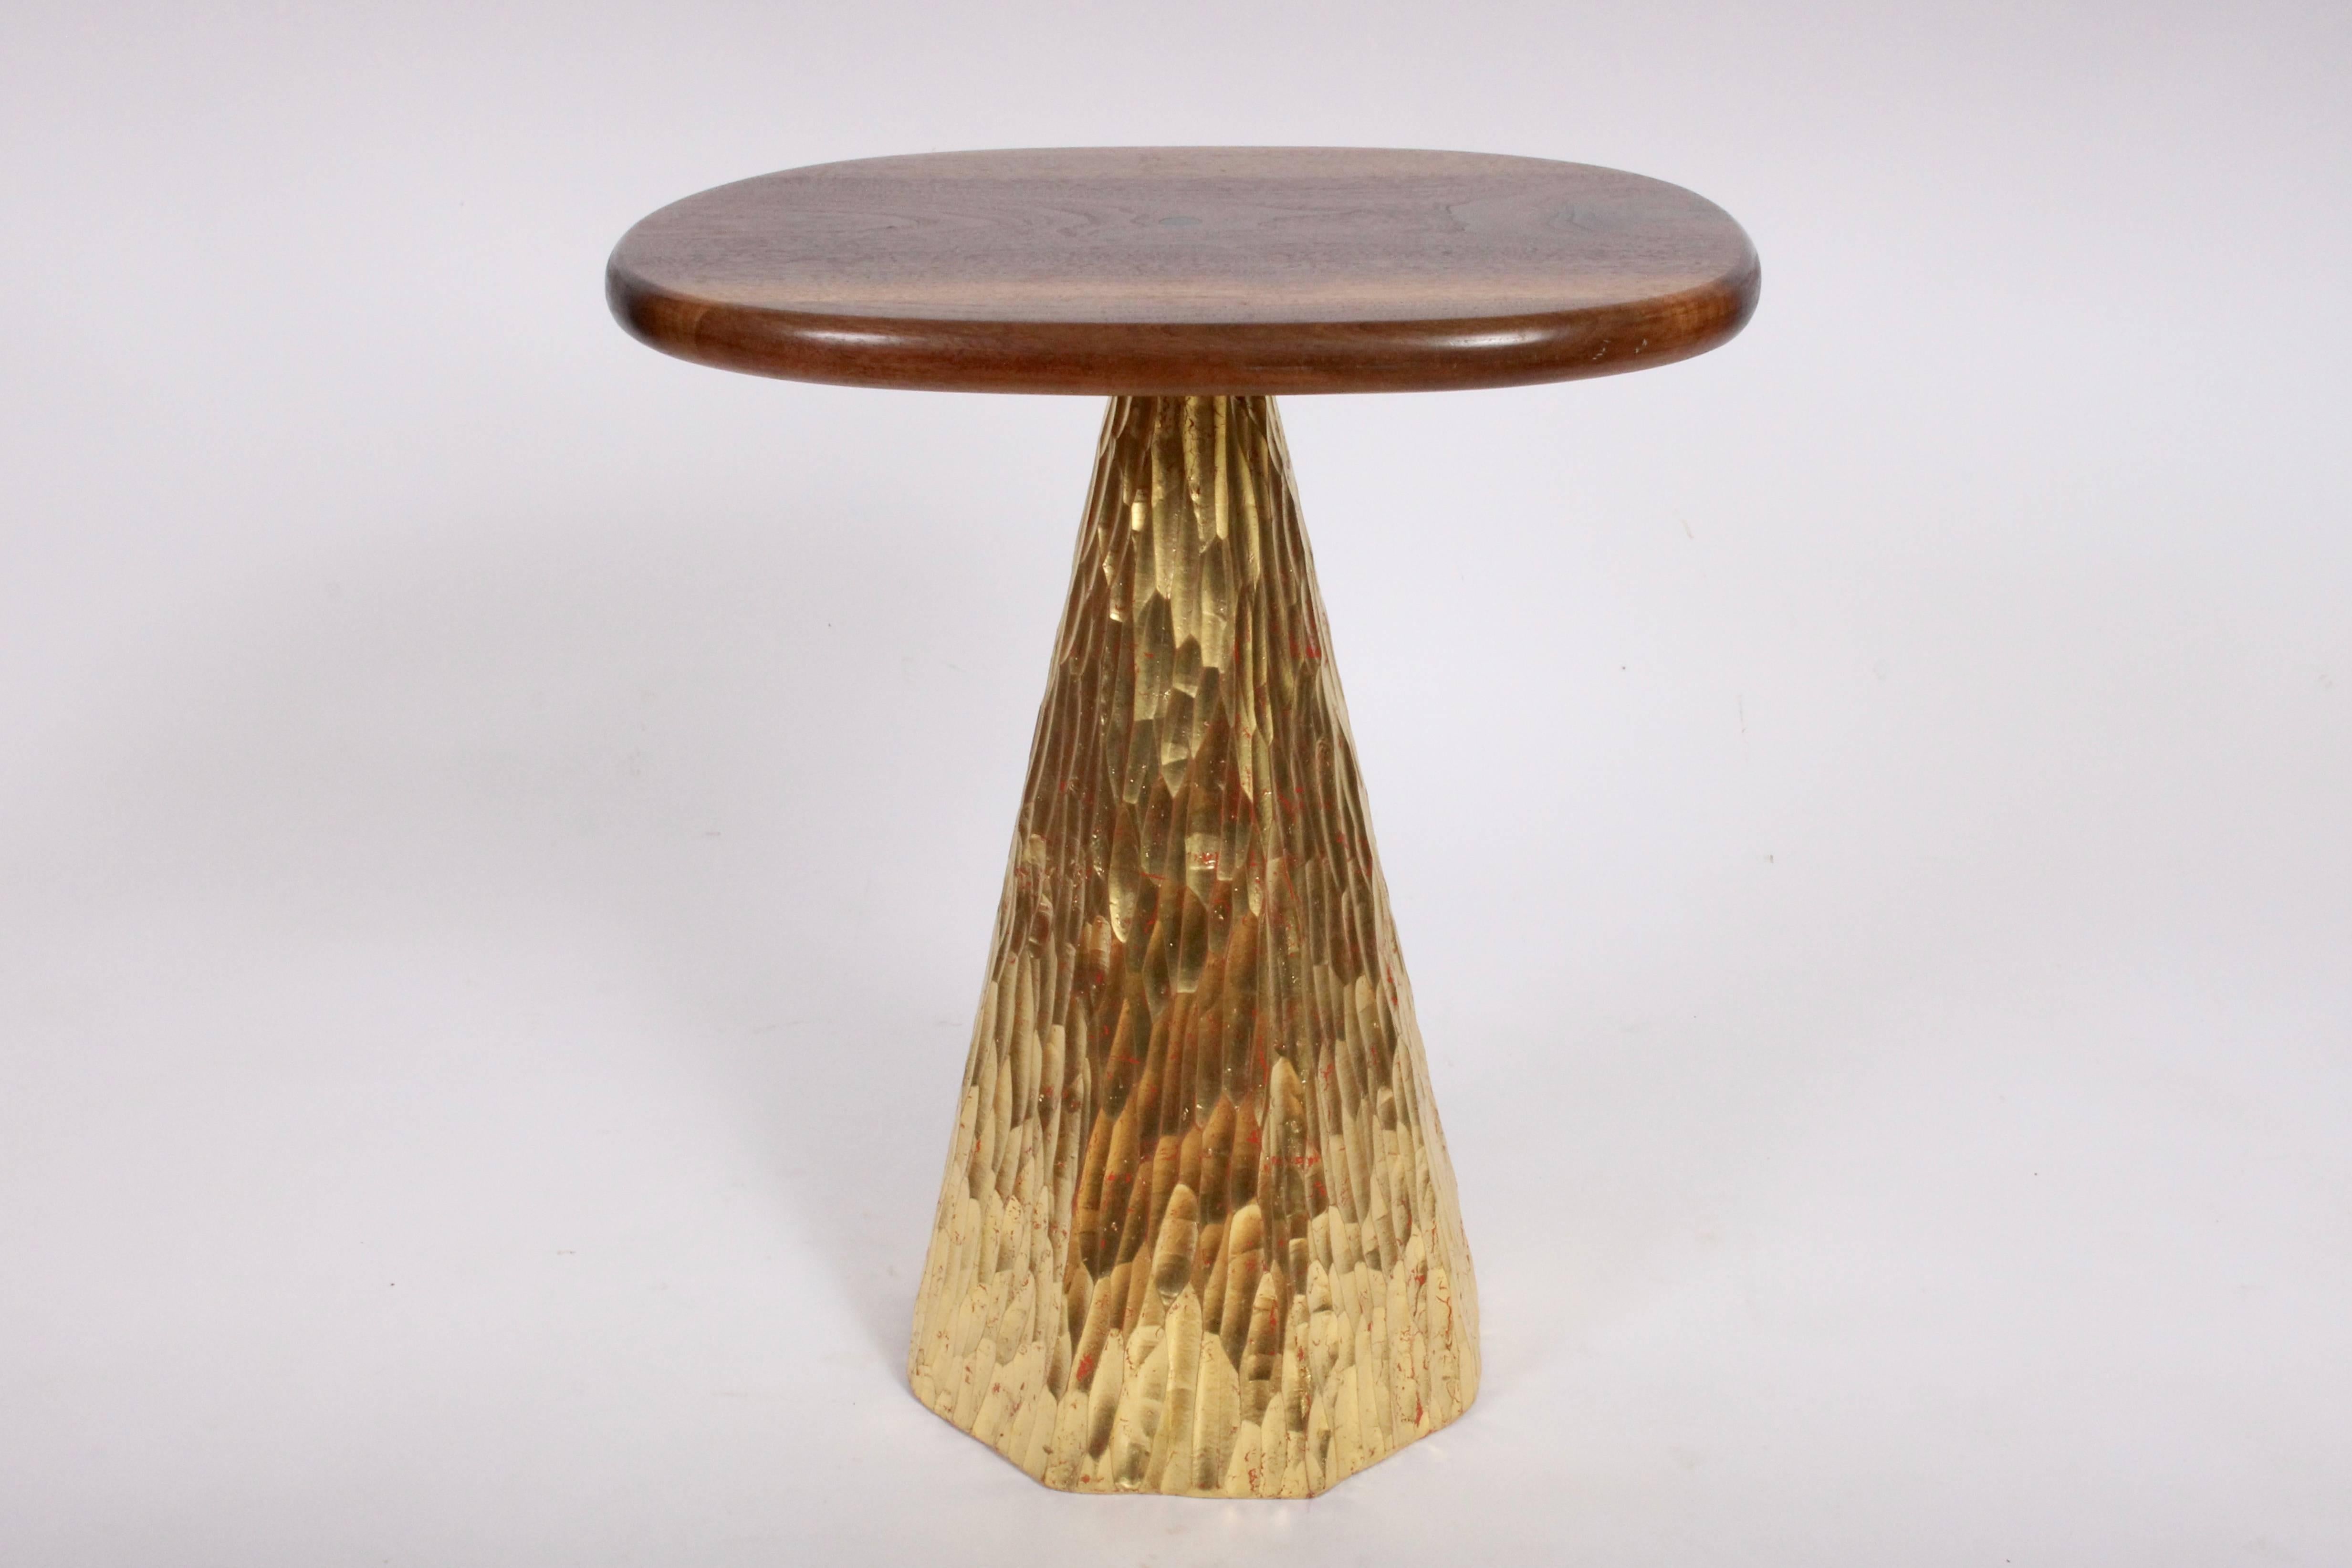 Sculptural Phillip Lloyd Powell hand chiseled, red highlighted Gold Leaf Table with Walnut surface. Featuring a lacquered solid Walnut ovoid surface, Ebony button inlay and hand carved hexagonal wooden base hand painted in Salmon Red and accentuated